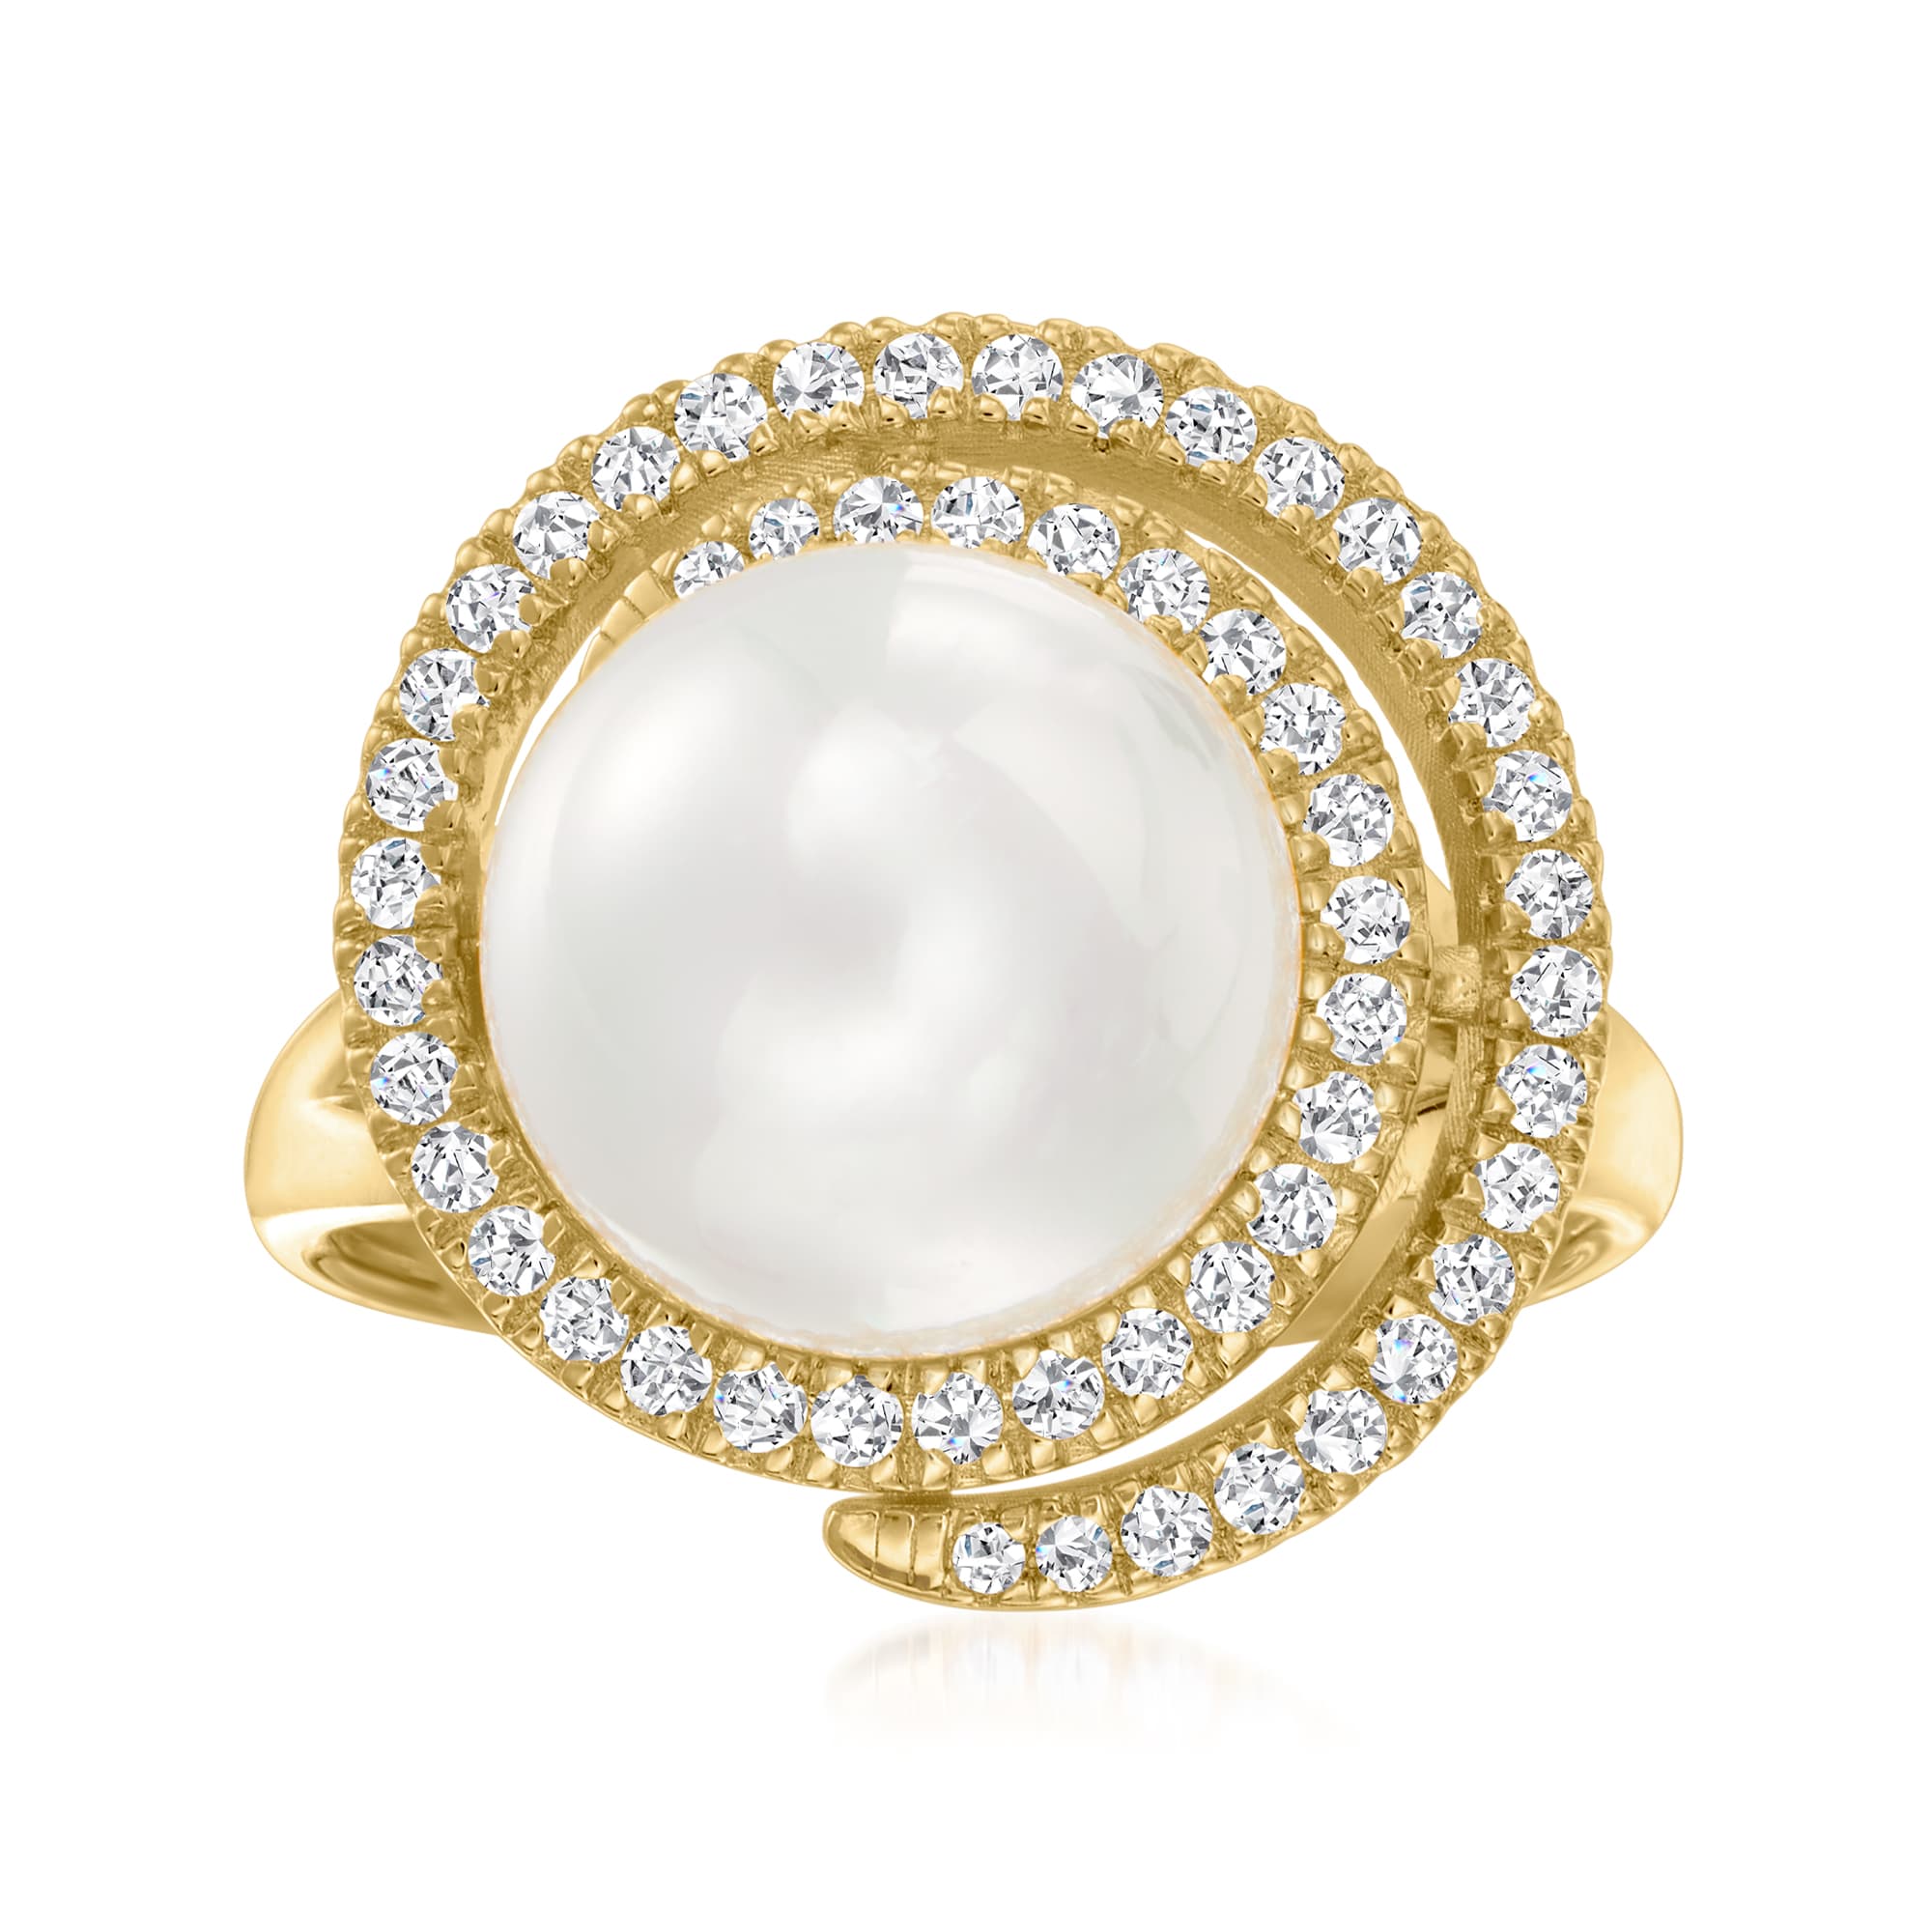 11mm Shell Pearl and .40 ct. t.w. CZ Swirl Ring in 18kt Gold Over ...